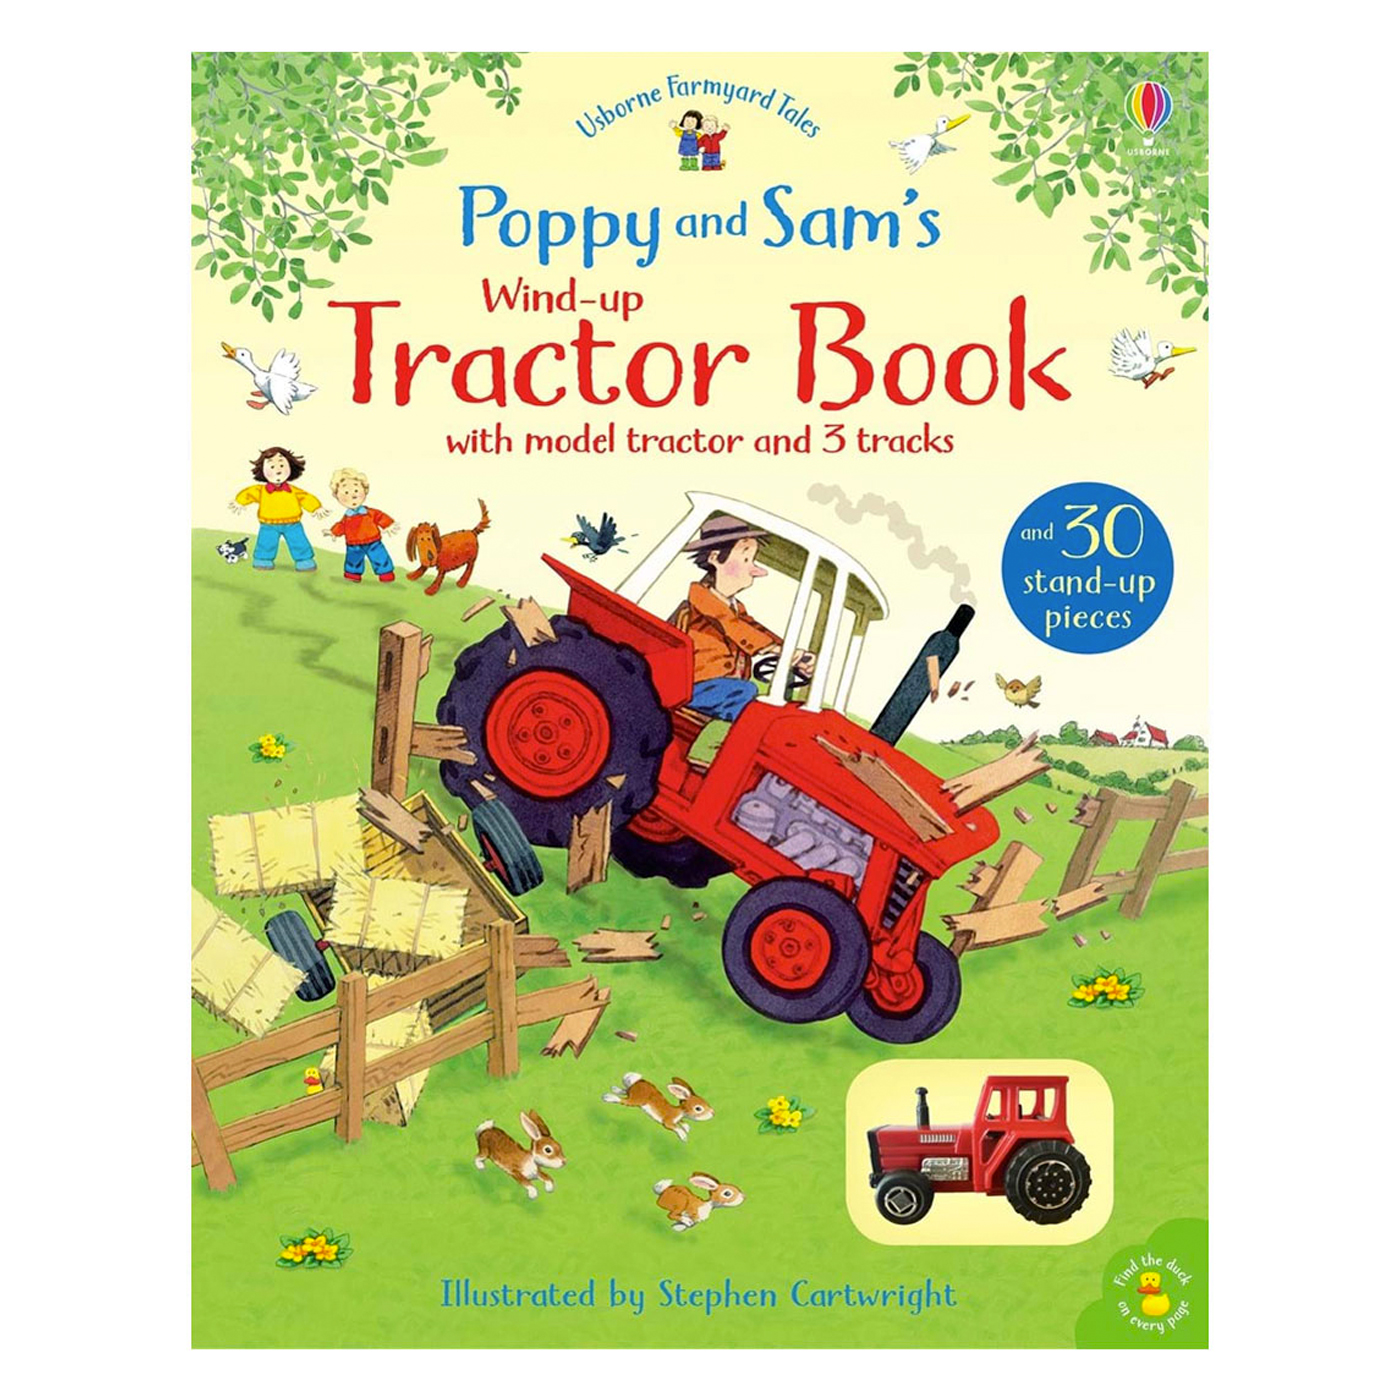  Poppy and Sam's Wind-up Tractor Book